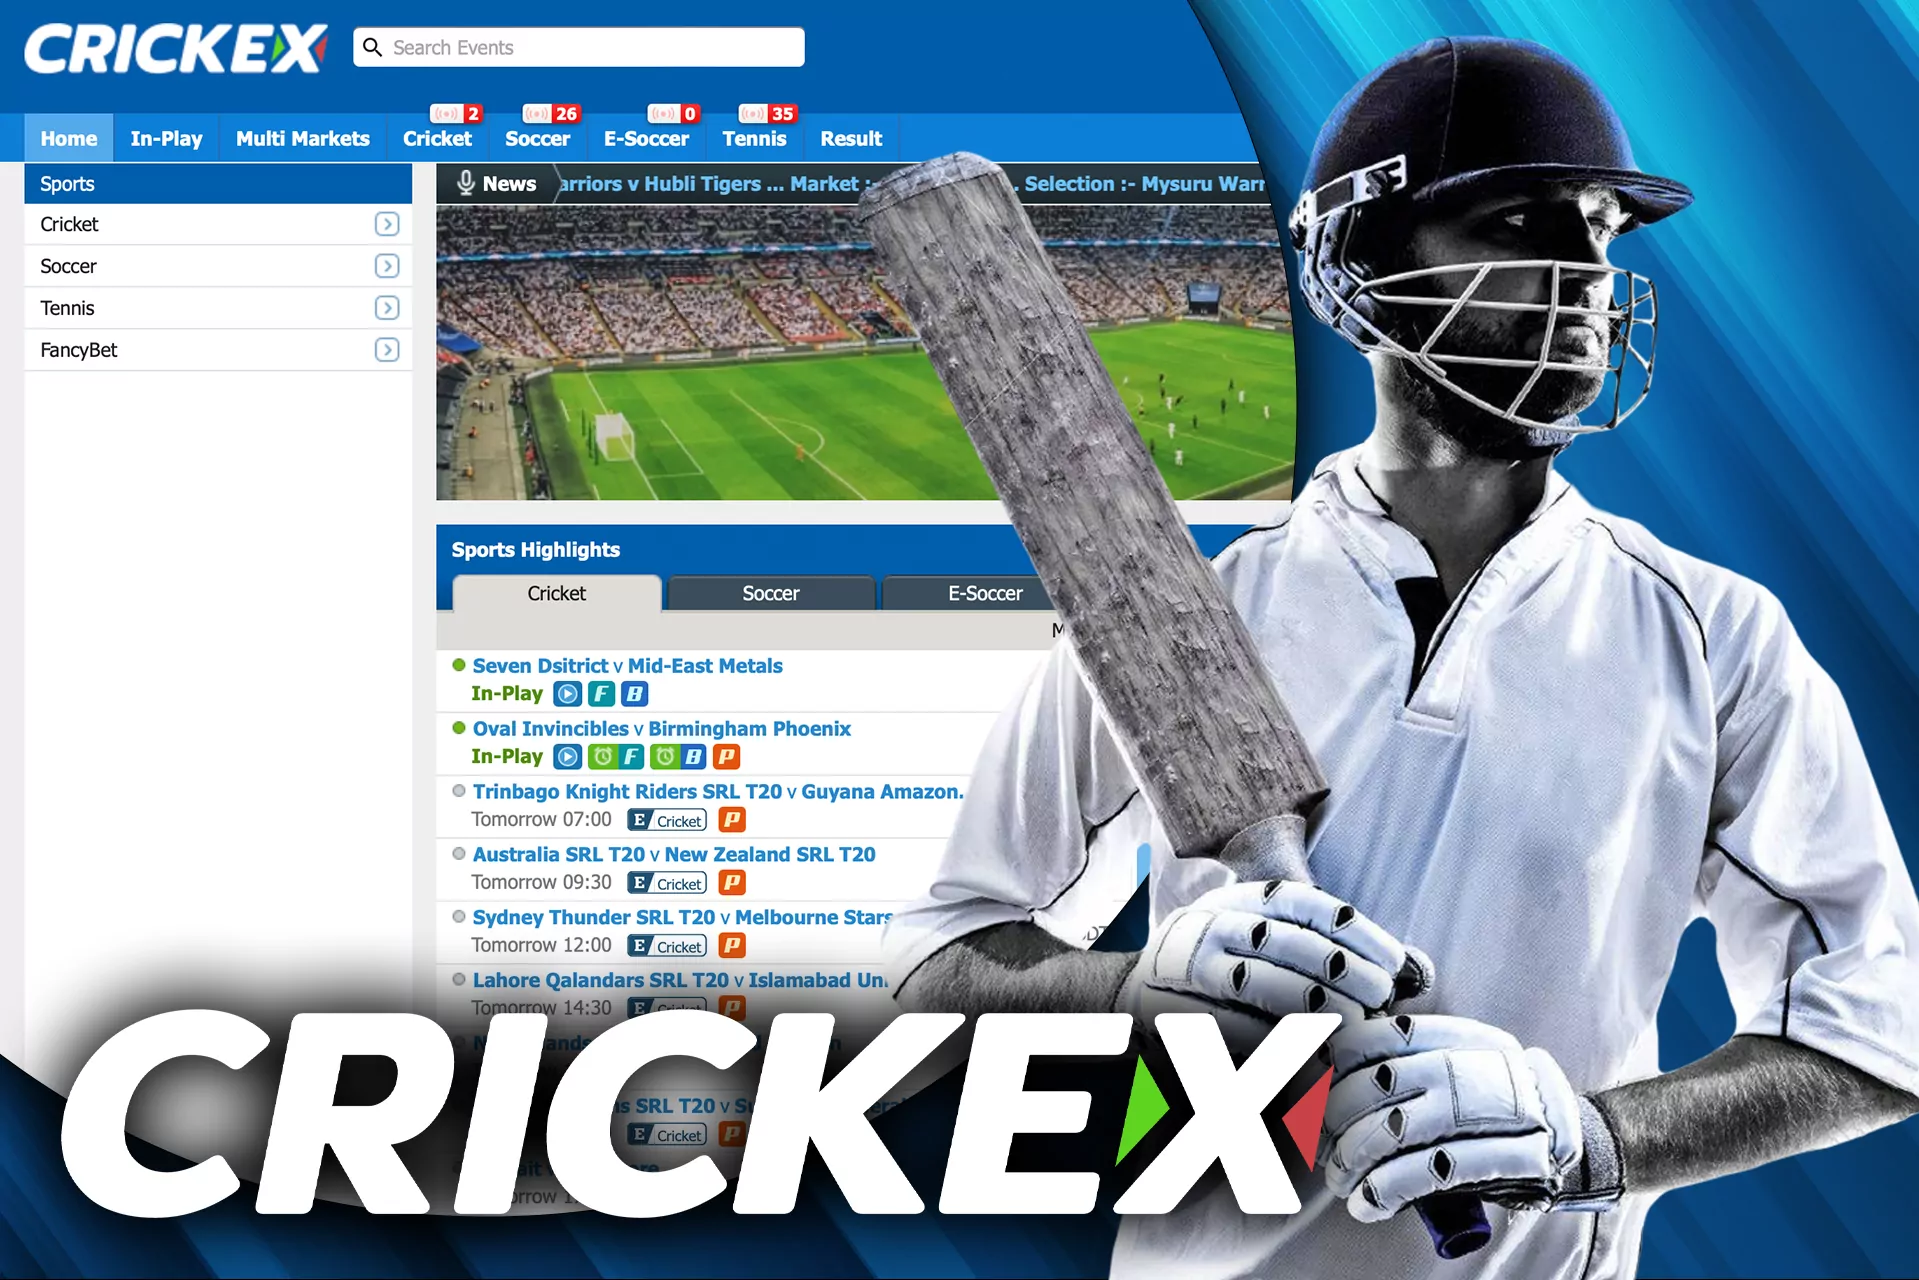 Place bets on IPL and other cricket leagues at Crickex.